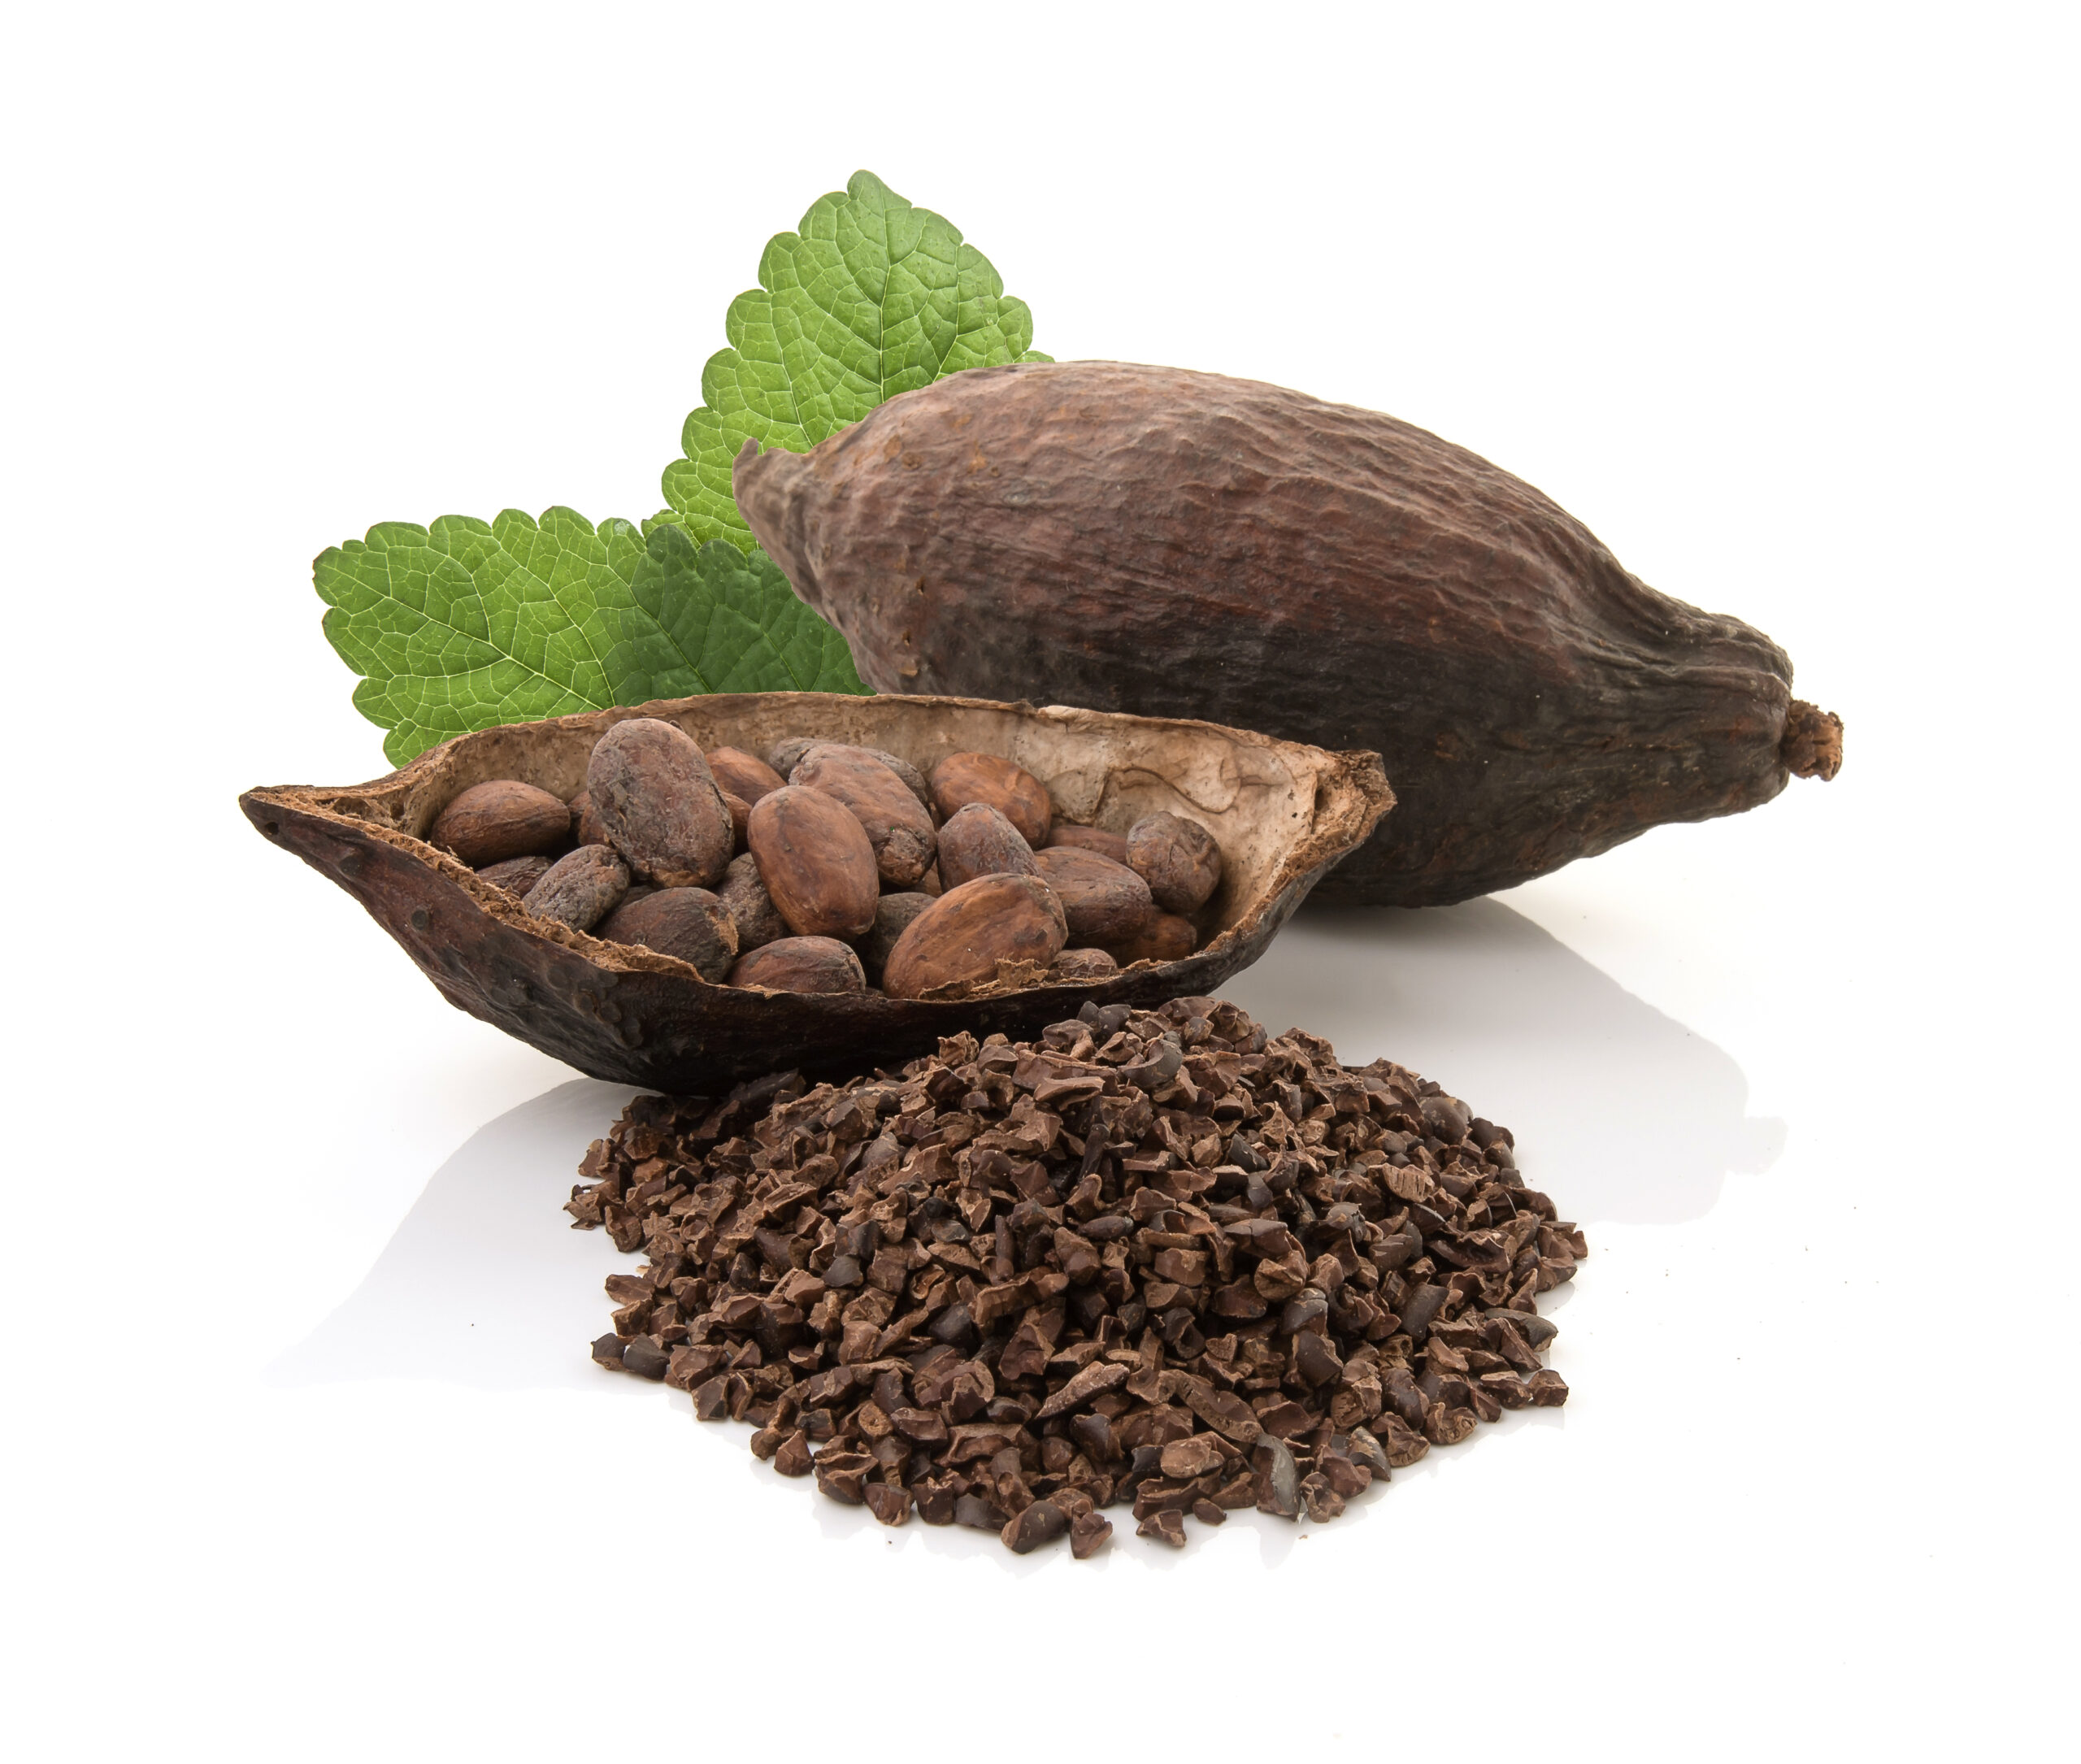 Cocoa pods and cocoa beans and cacao powder with leaves isolated on white background.